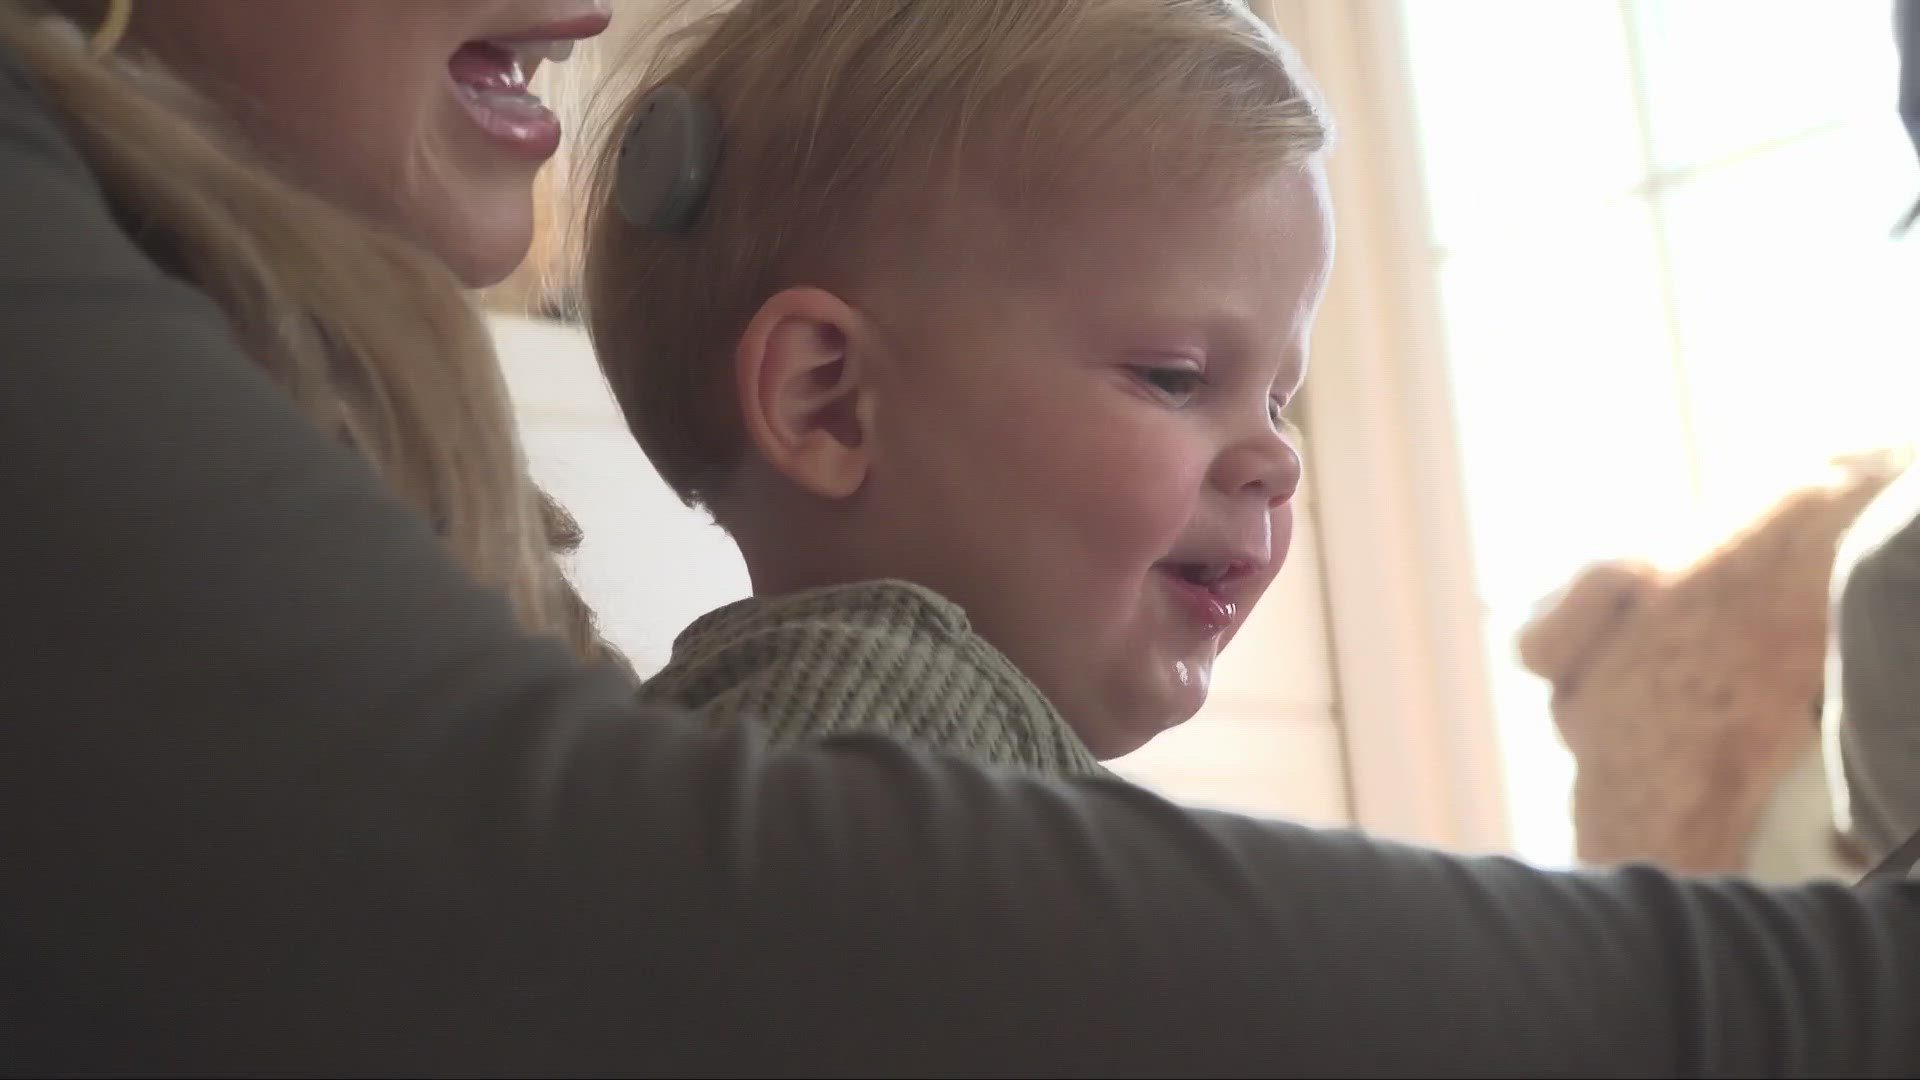 Corbin Lapso was just 8 months old when he underwent life-changing surgery for hearing loss.